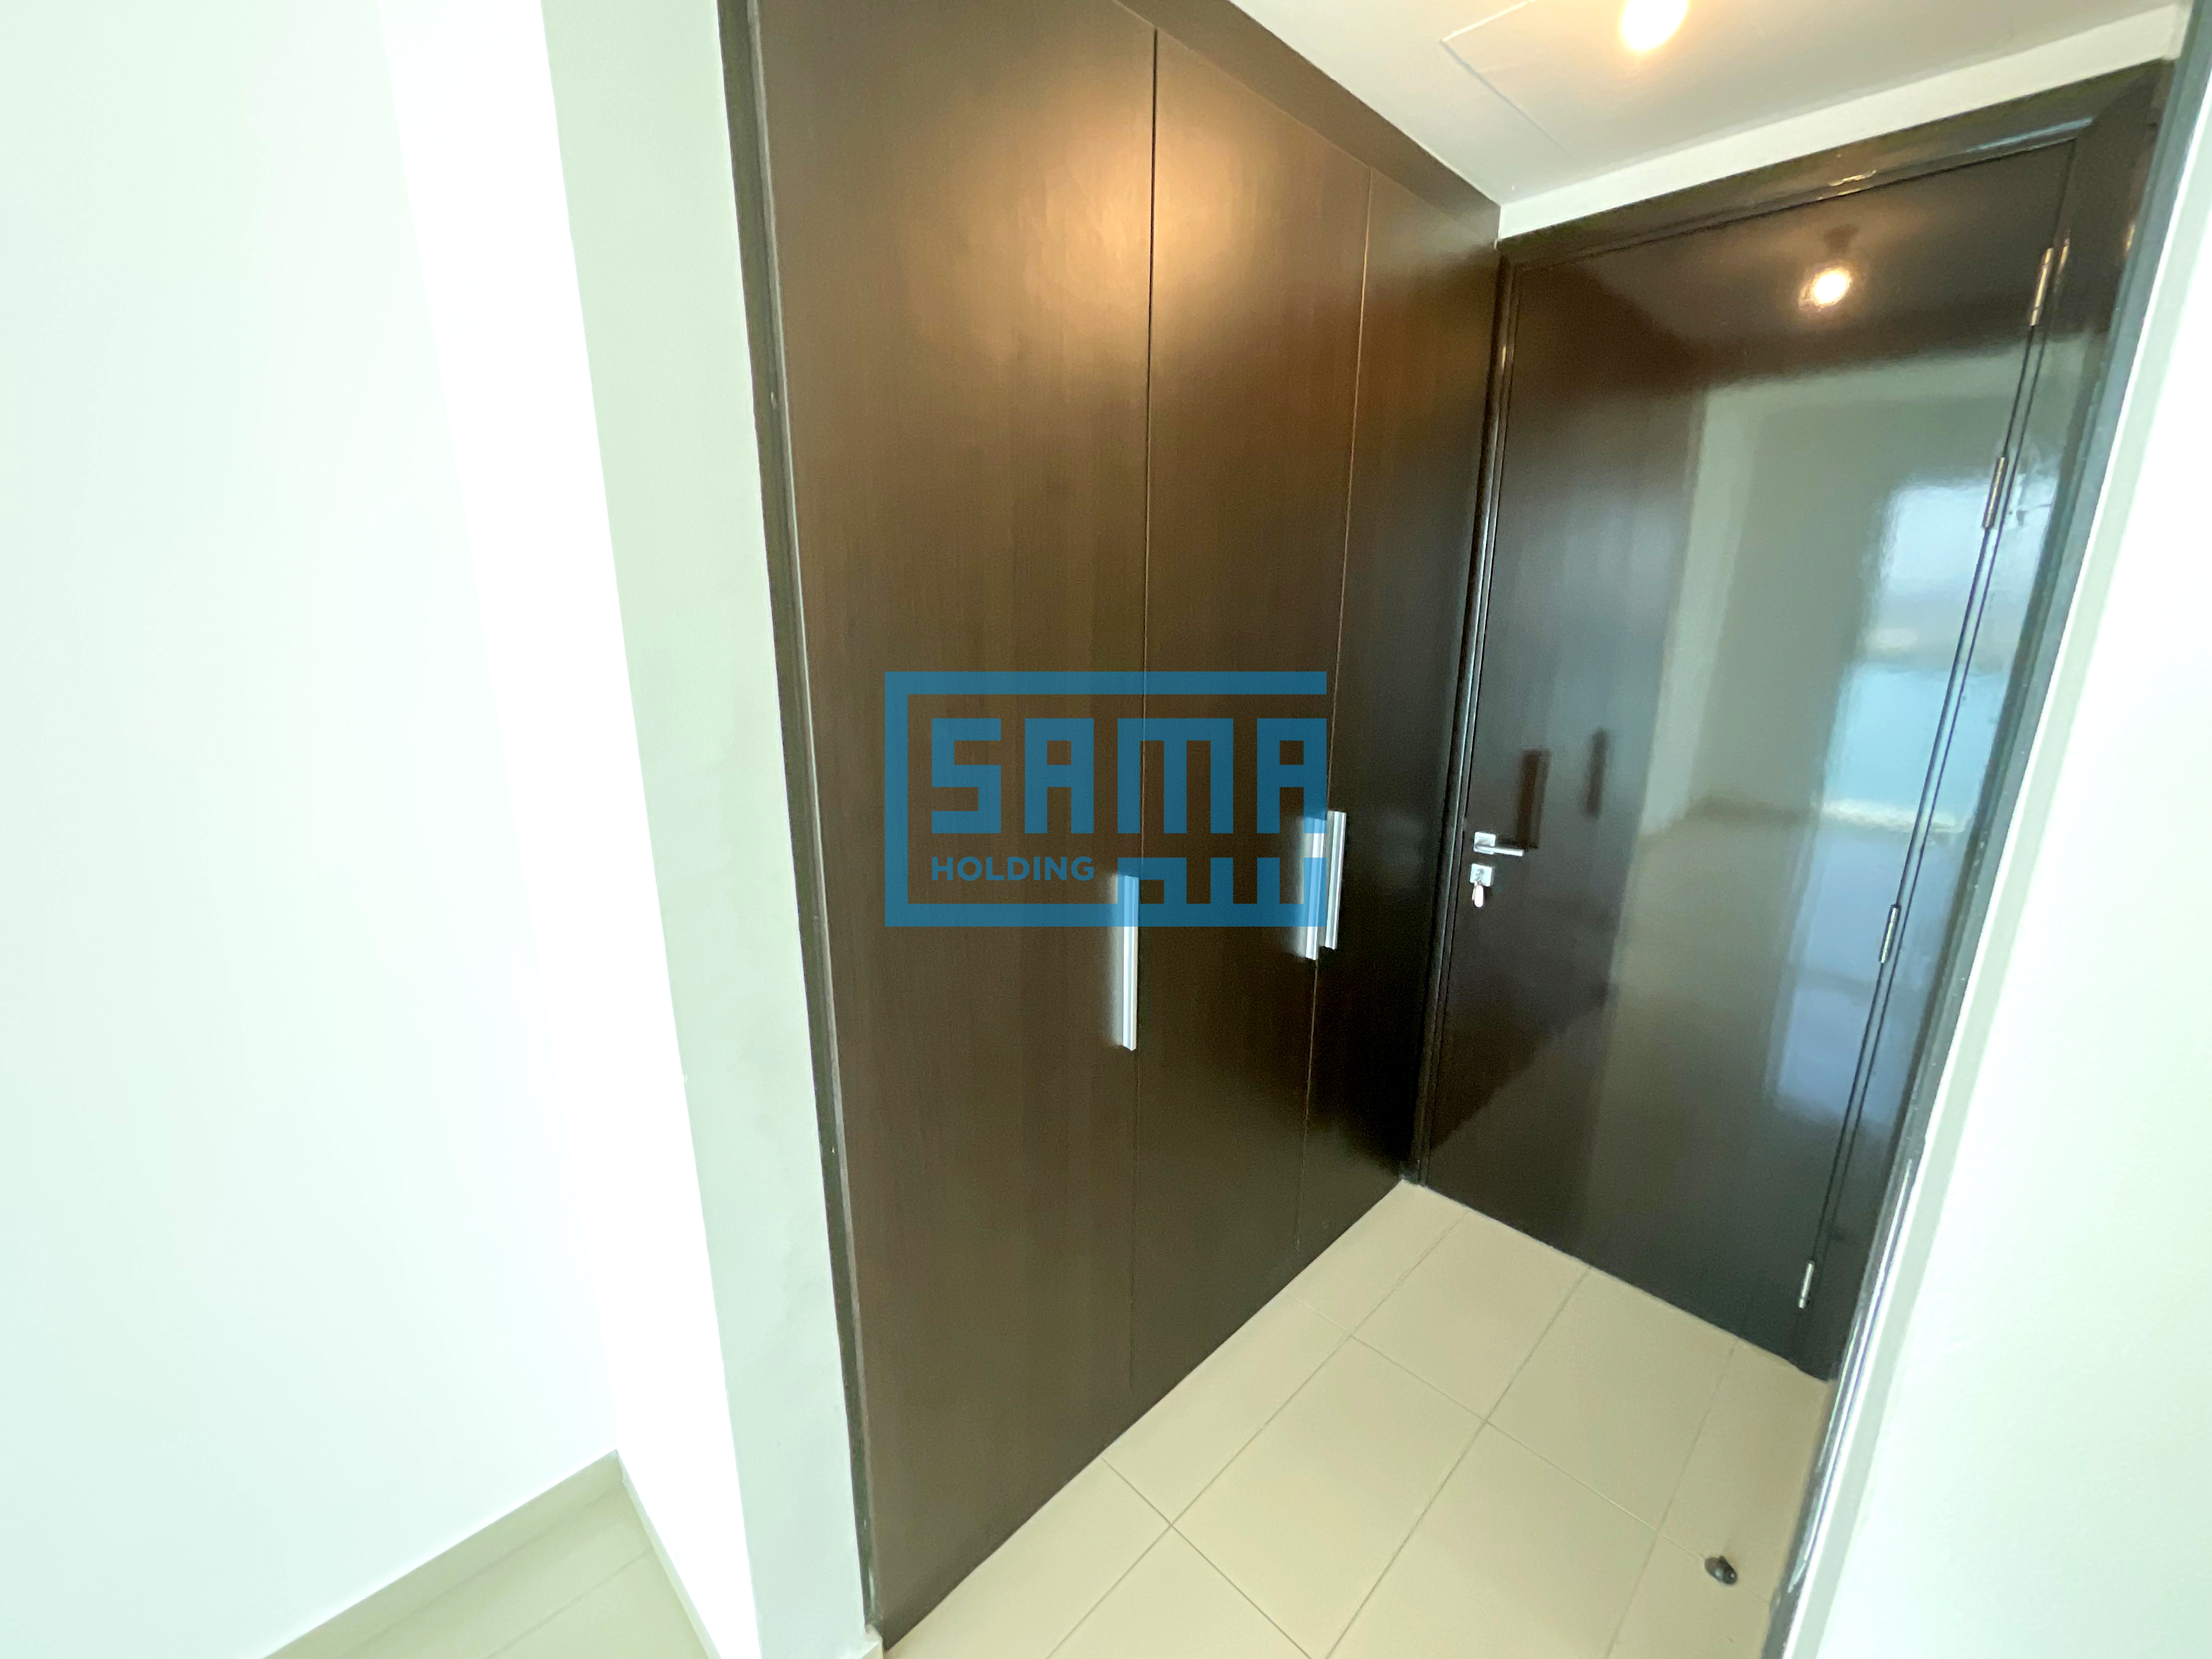 3 Bedrooms Apartment with Stunning Canal View for Sale located at A3 Tower, Marina Square, Al Reem Island - Abu Dhabi